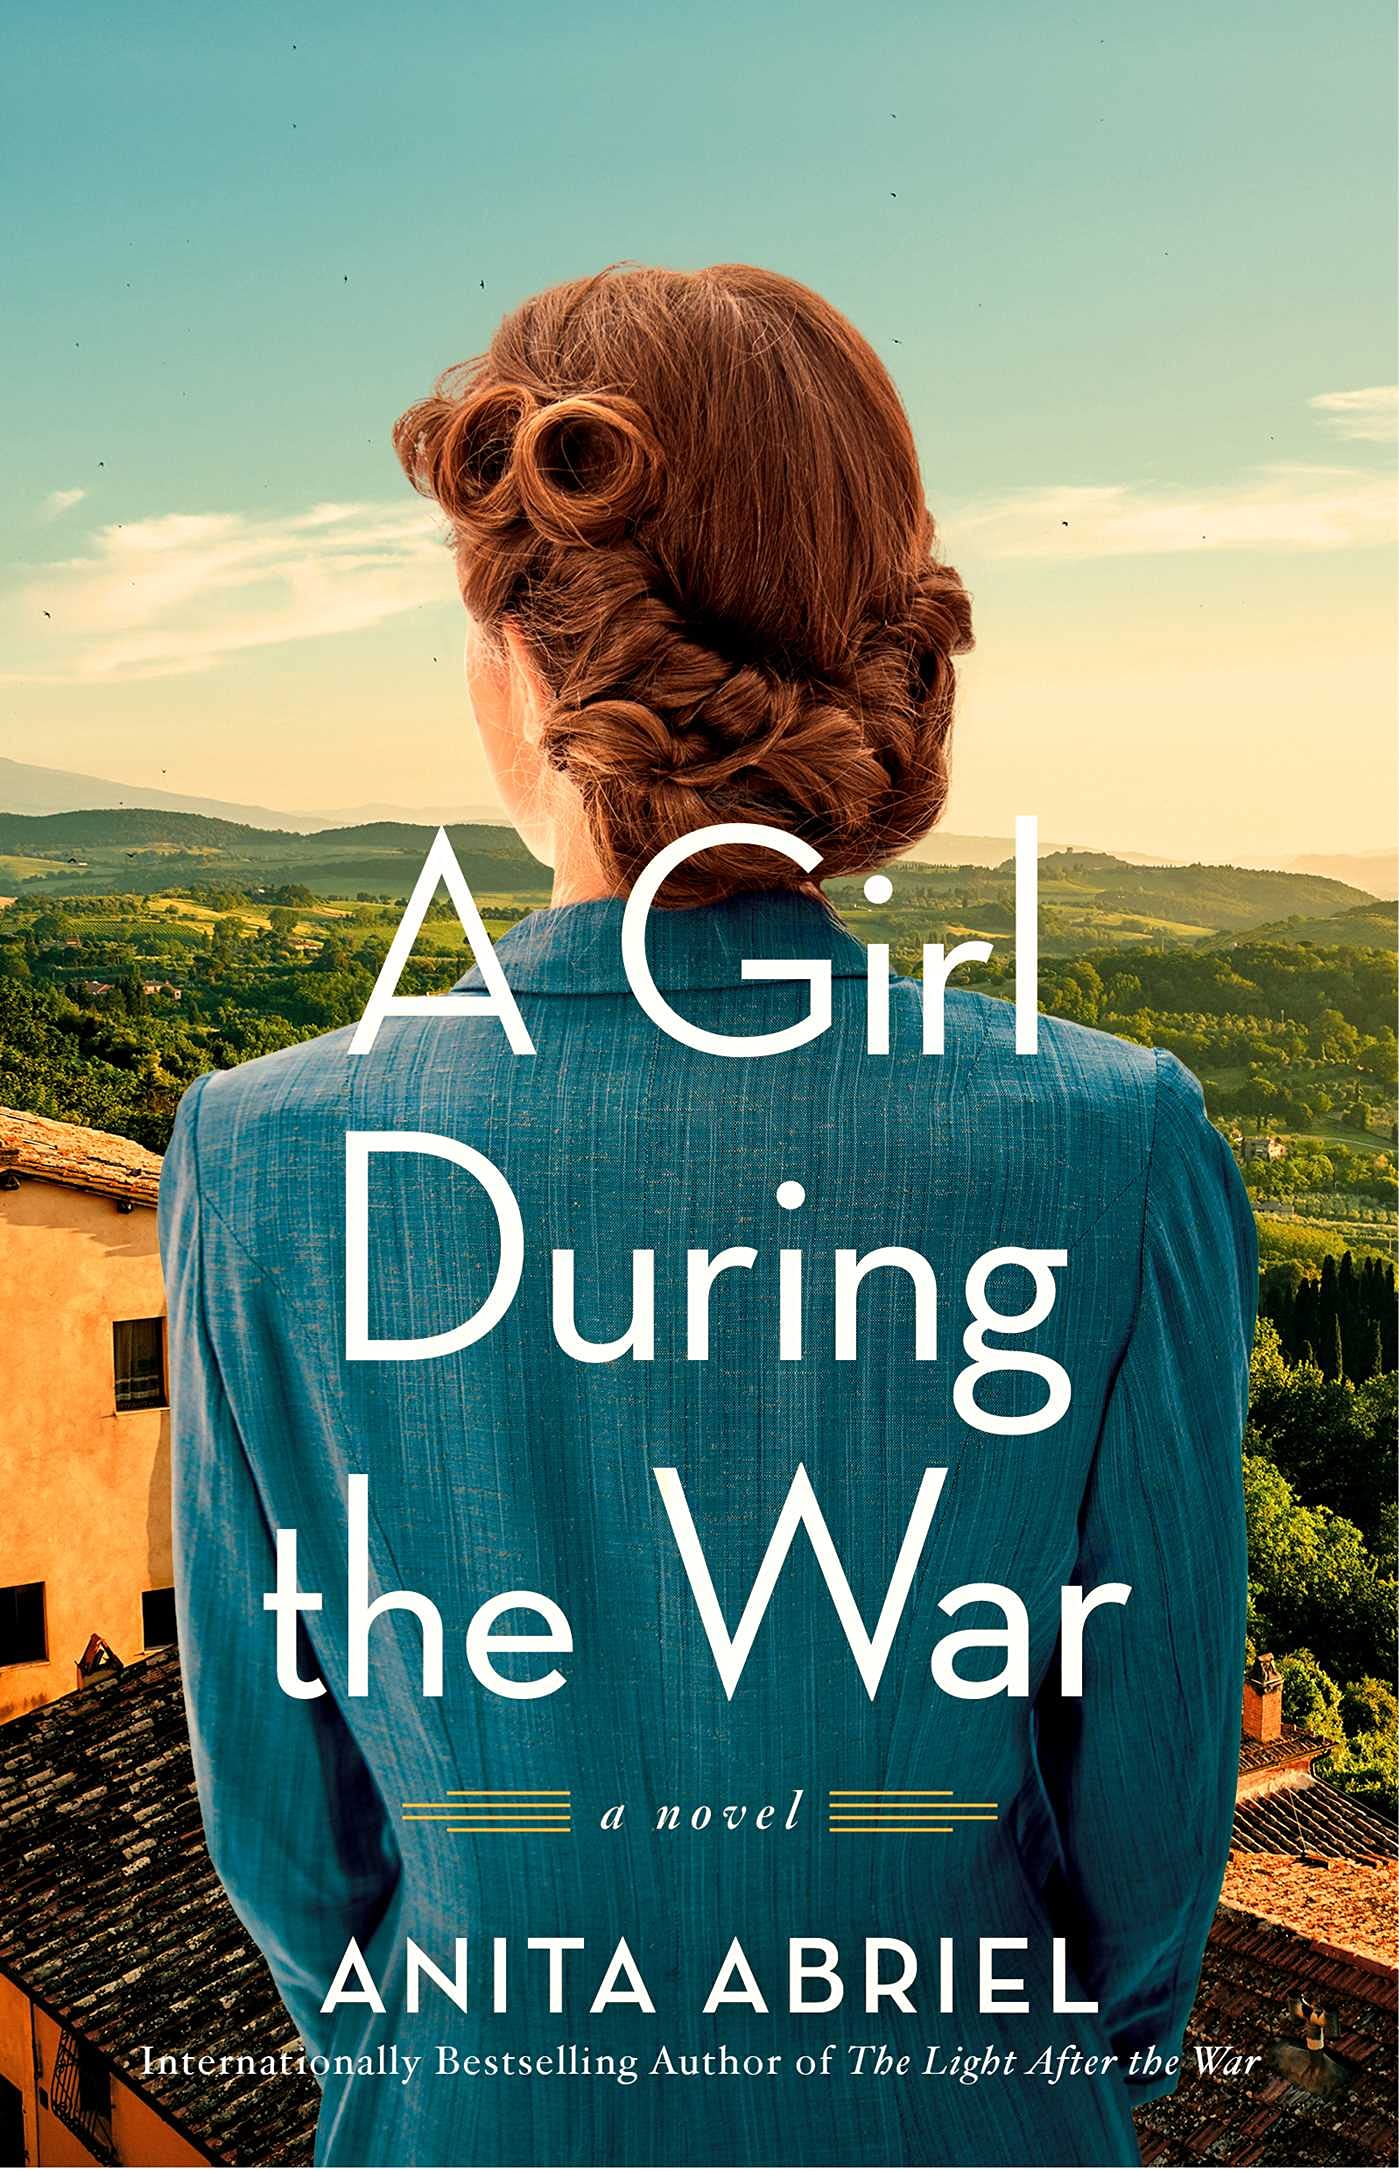 A Girl During the War by Anita Abriel